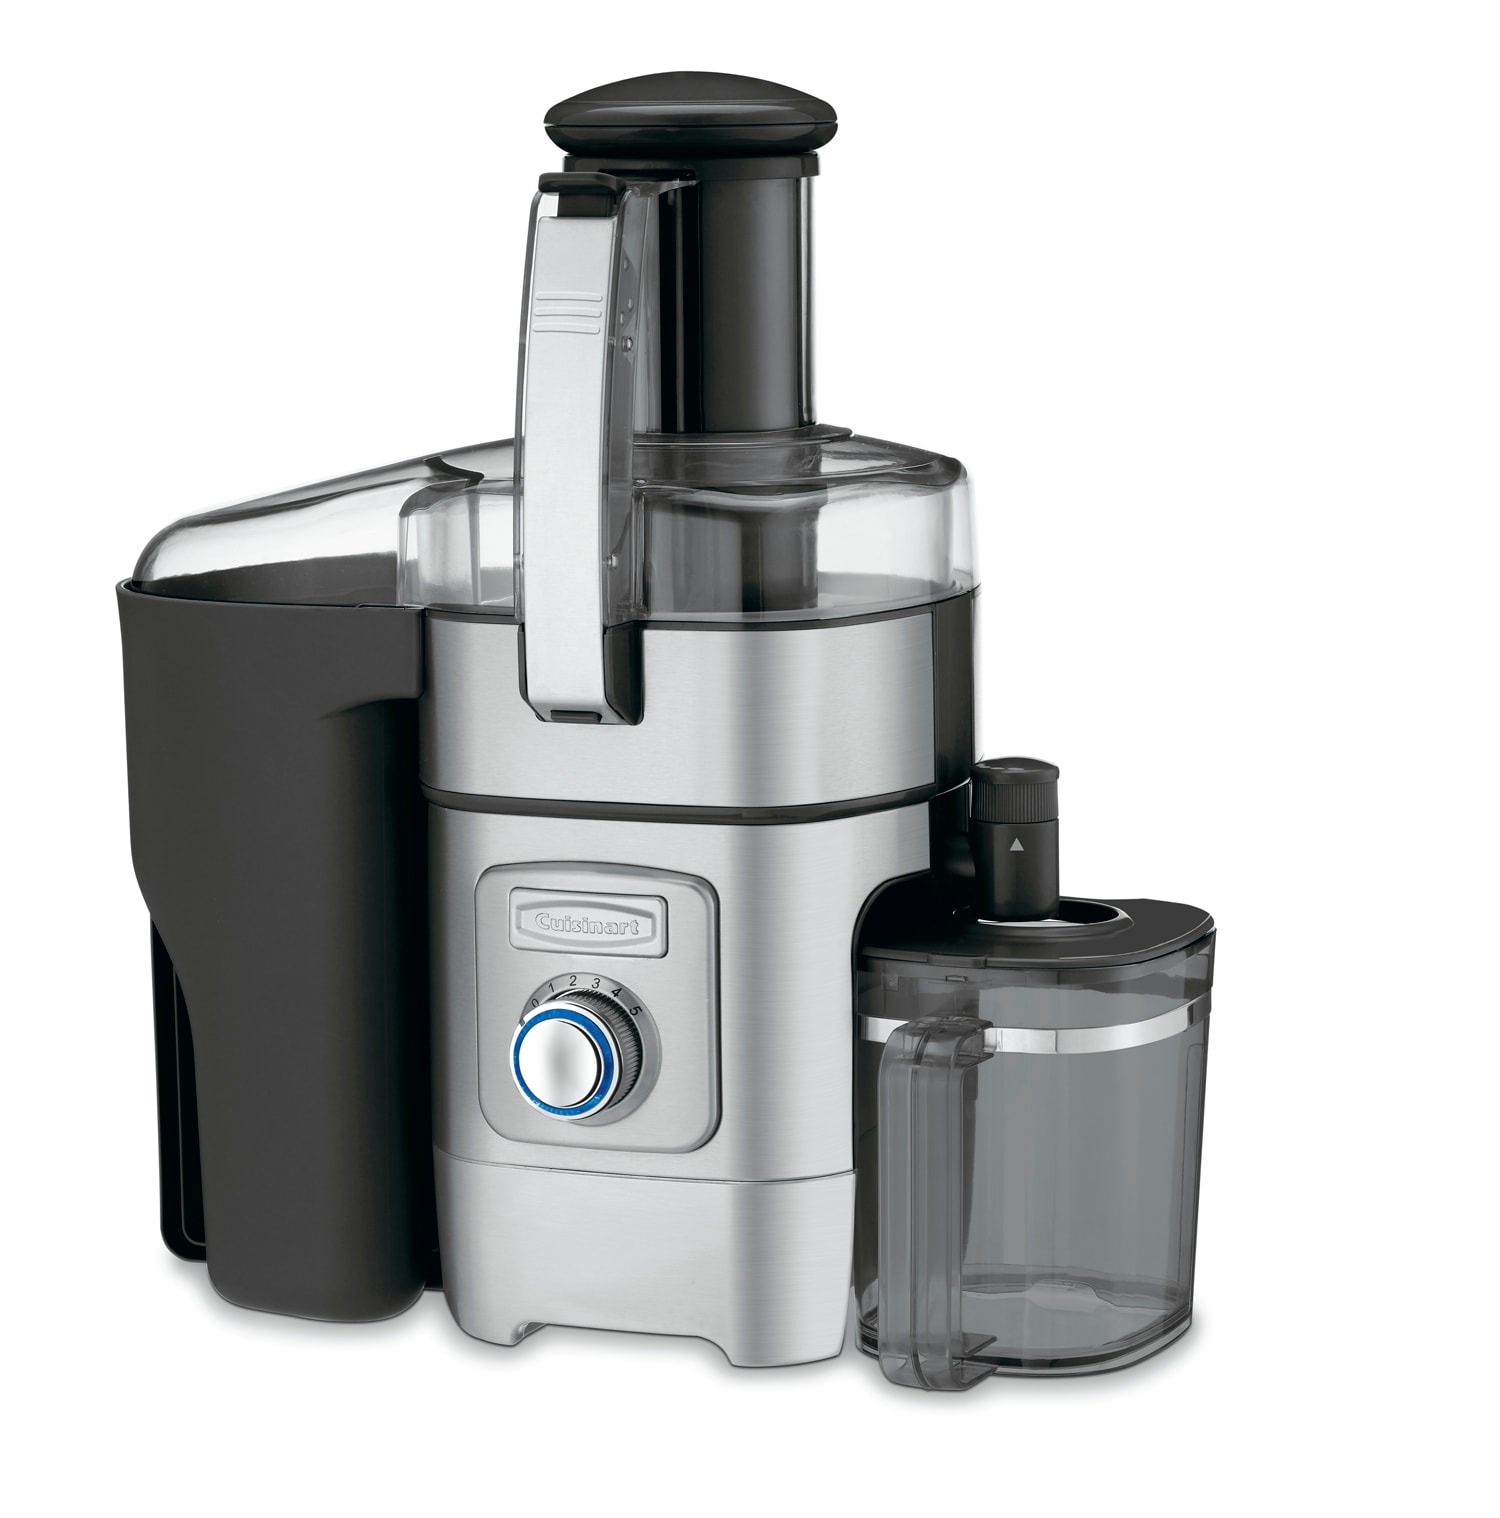 Hamilton Beach Big Mouth Pro Juicer, Gray and Die-Cast Metal